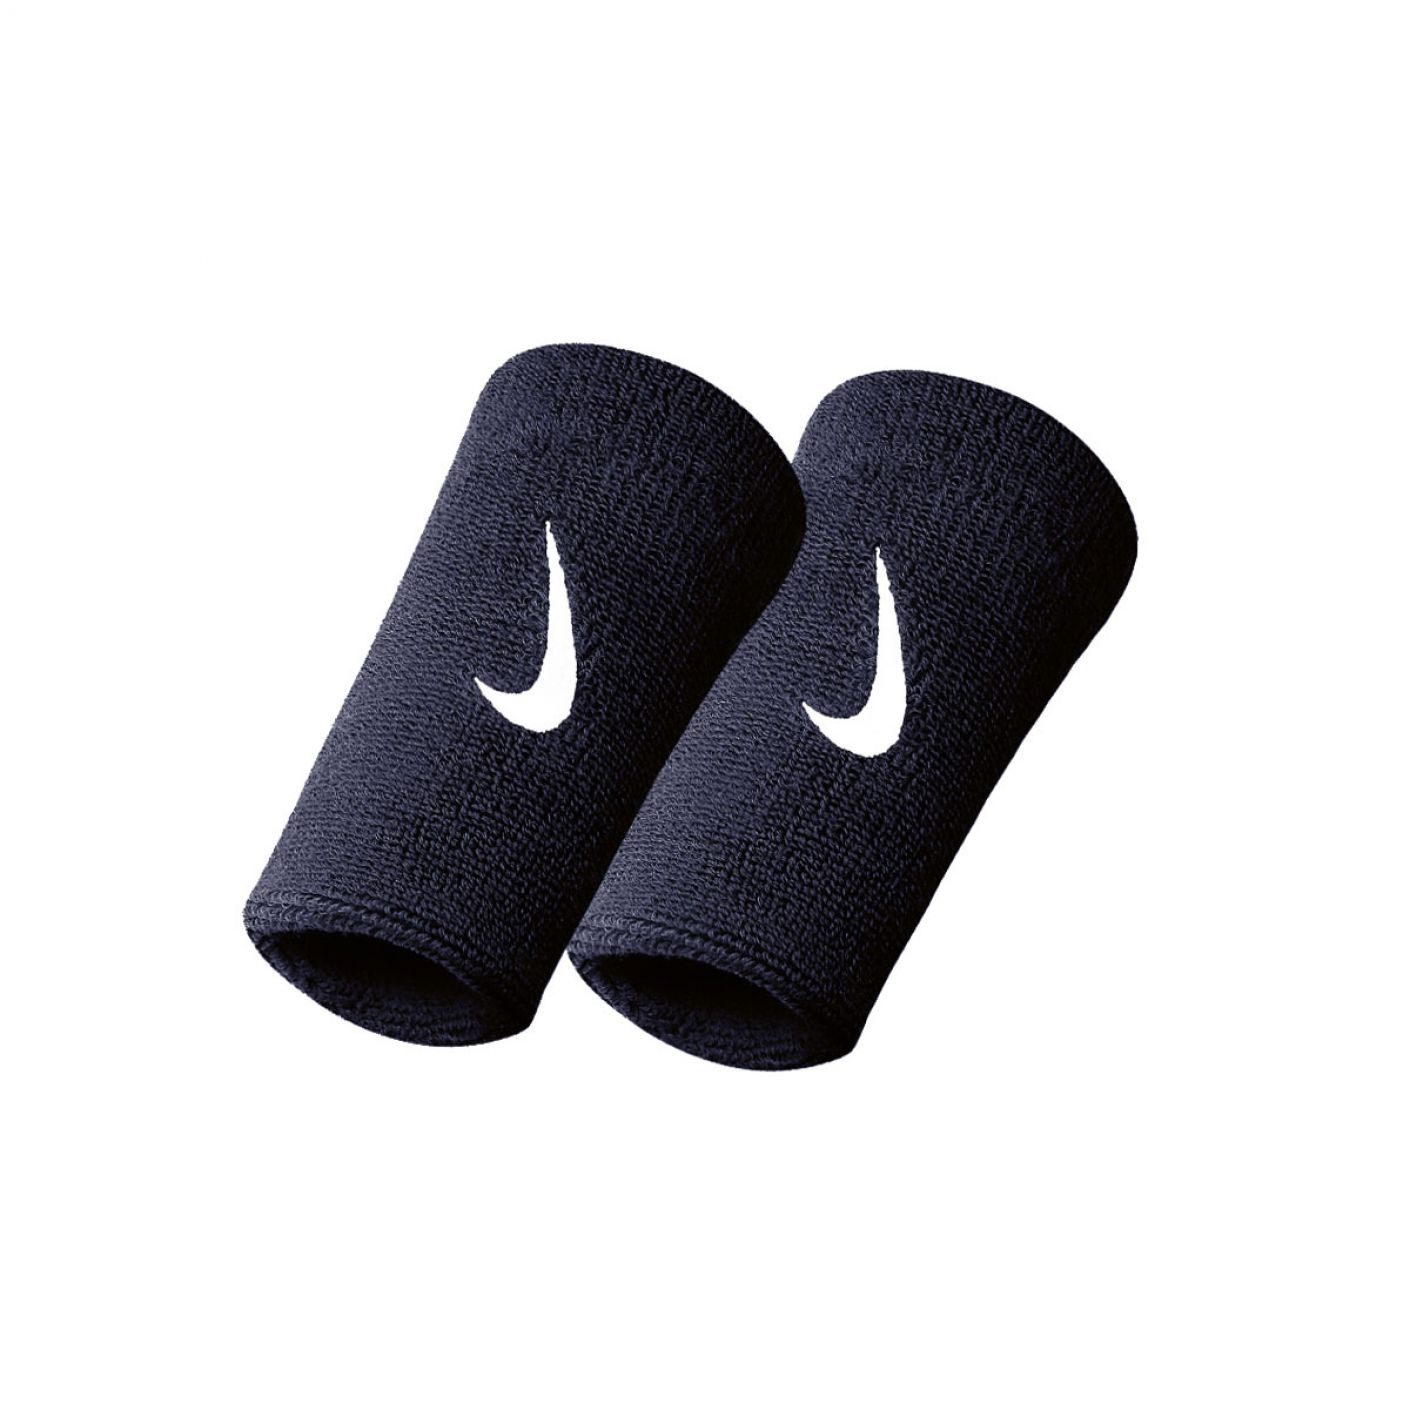 Nike Double Wristbands Cuffs Blue Obsidian White